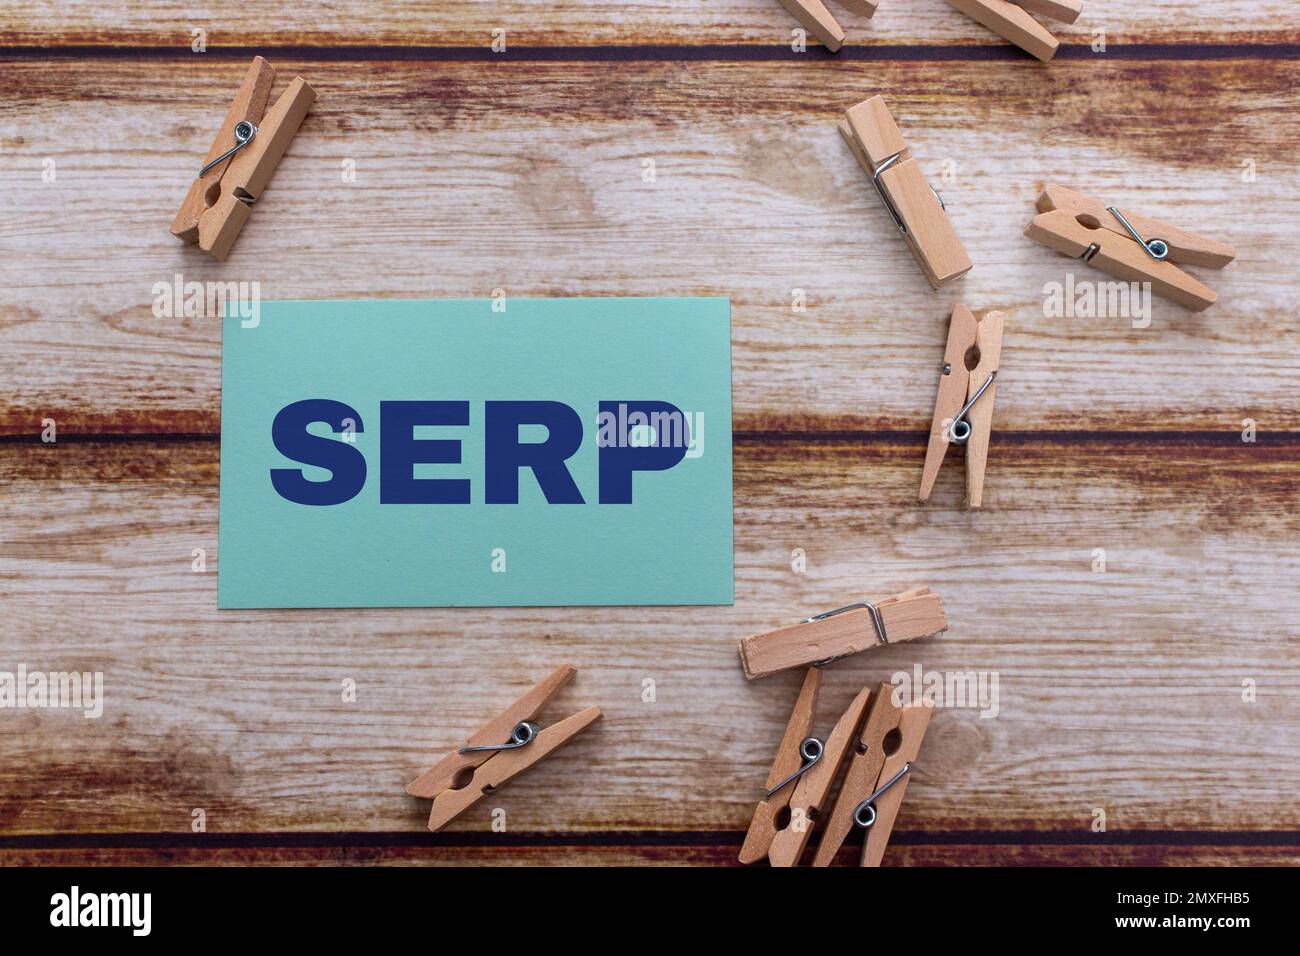 Conceptual message card showing SERP (search engine results pages) on shabby wooden table. SEM, SEO web marketing or internet business keyword concept Stock Photo